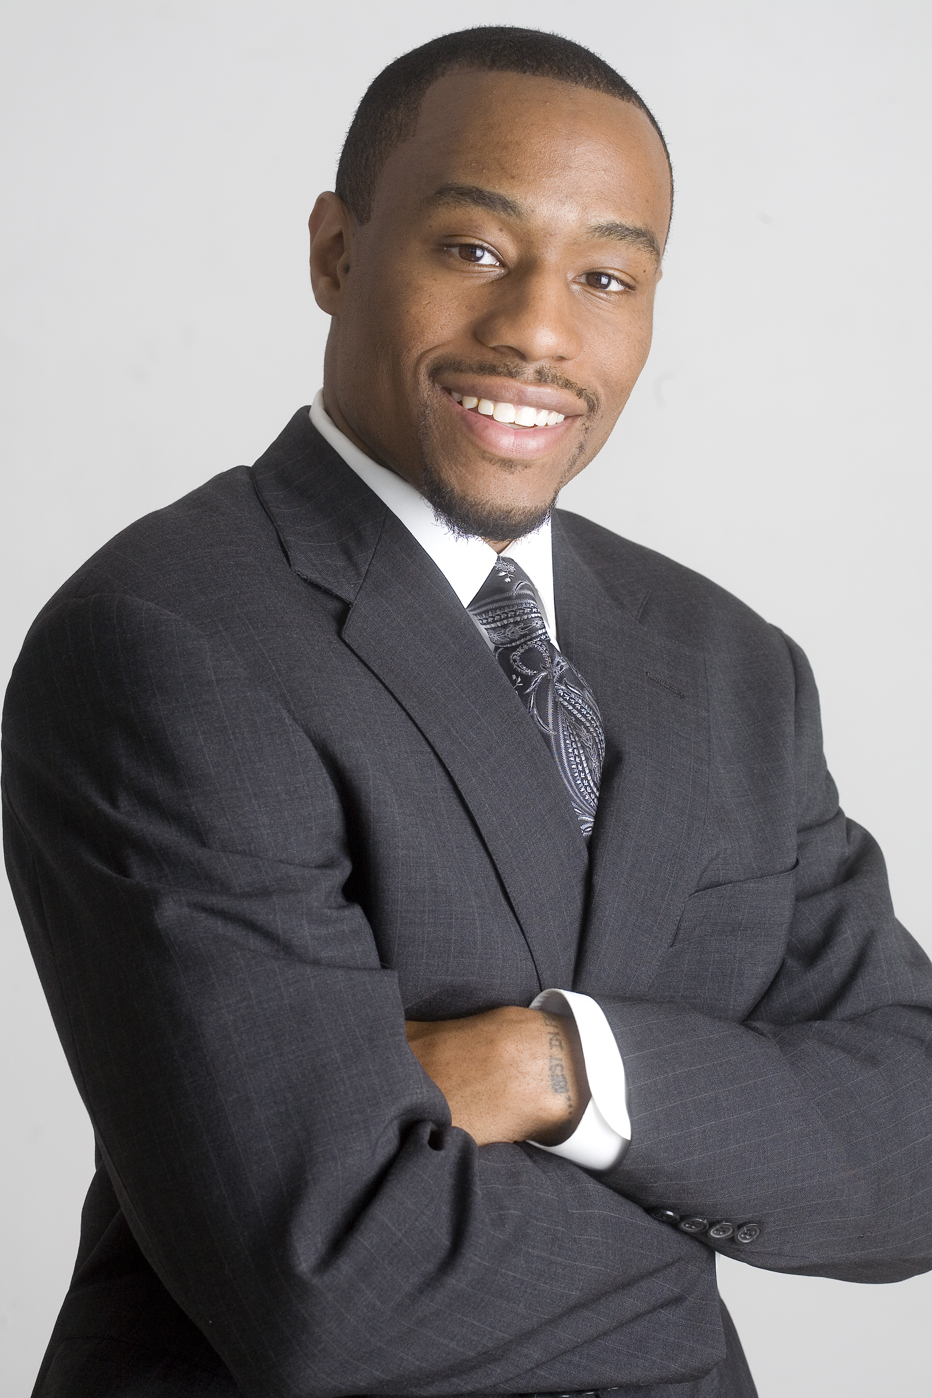 Byron Allen’s Media Group Signs Veteran News & Political Television Host Marc Lamont Hill to the Grio